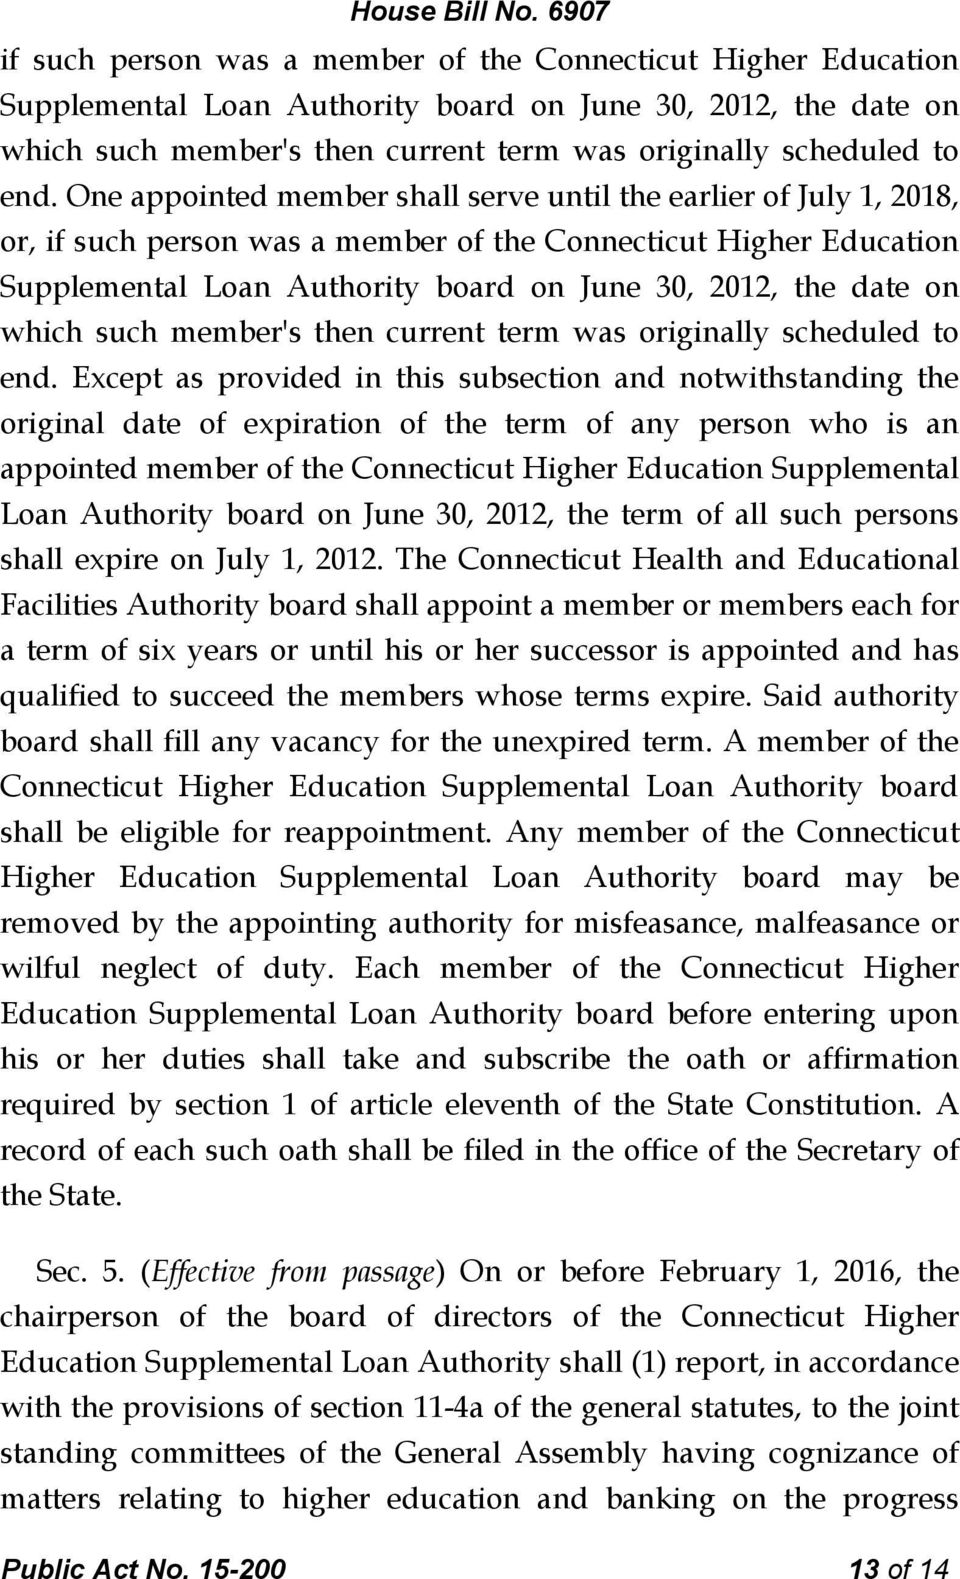 appointed member of the Connecticut Higher Education Supplemental Loan Authority board on June 30, 2012, the term of all such persons shall expire on July 1, 2012.